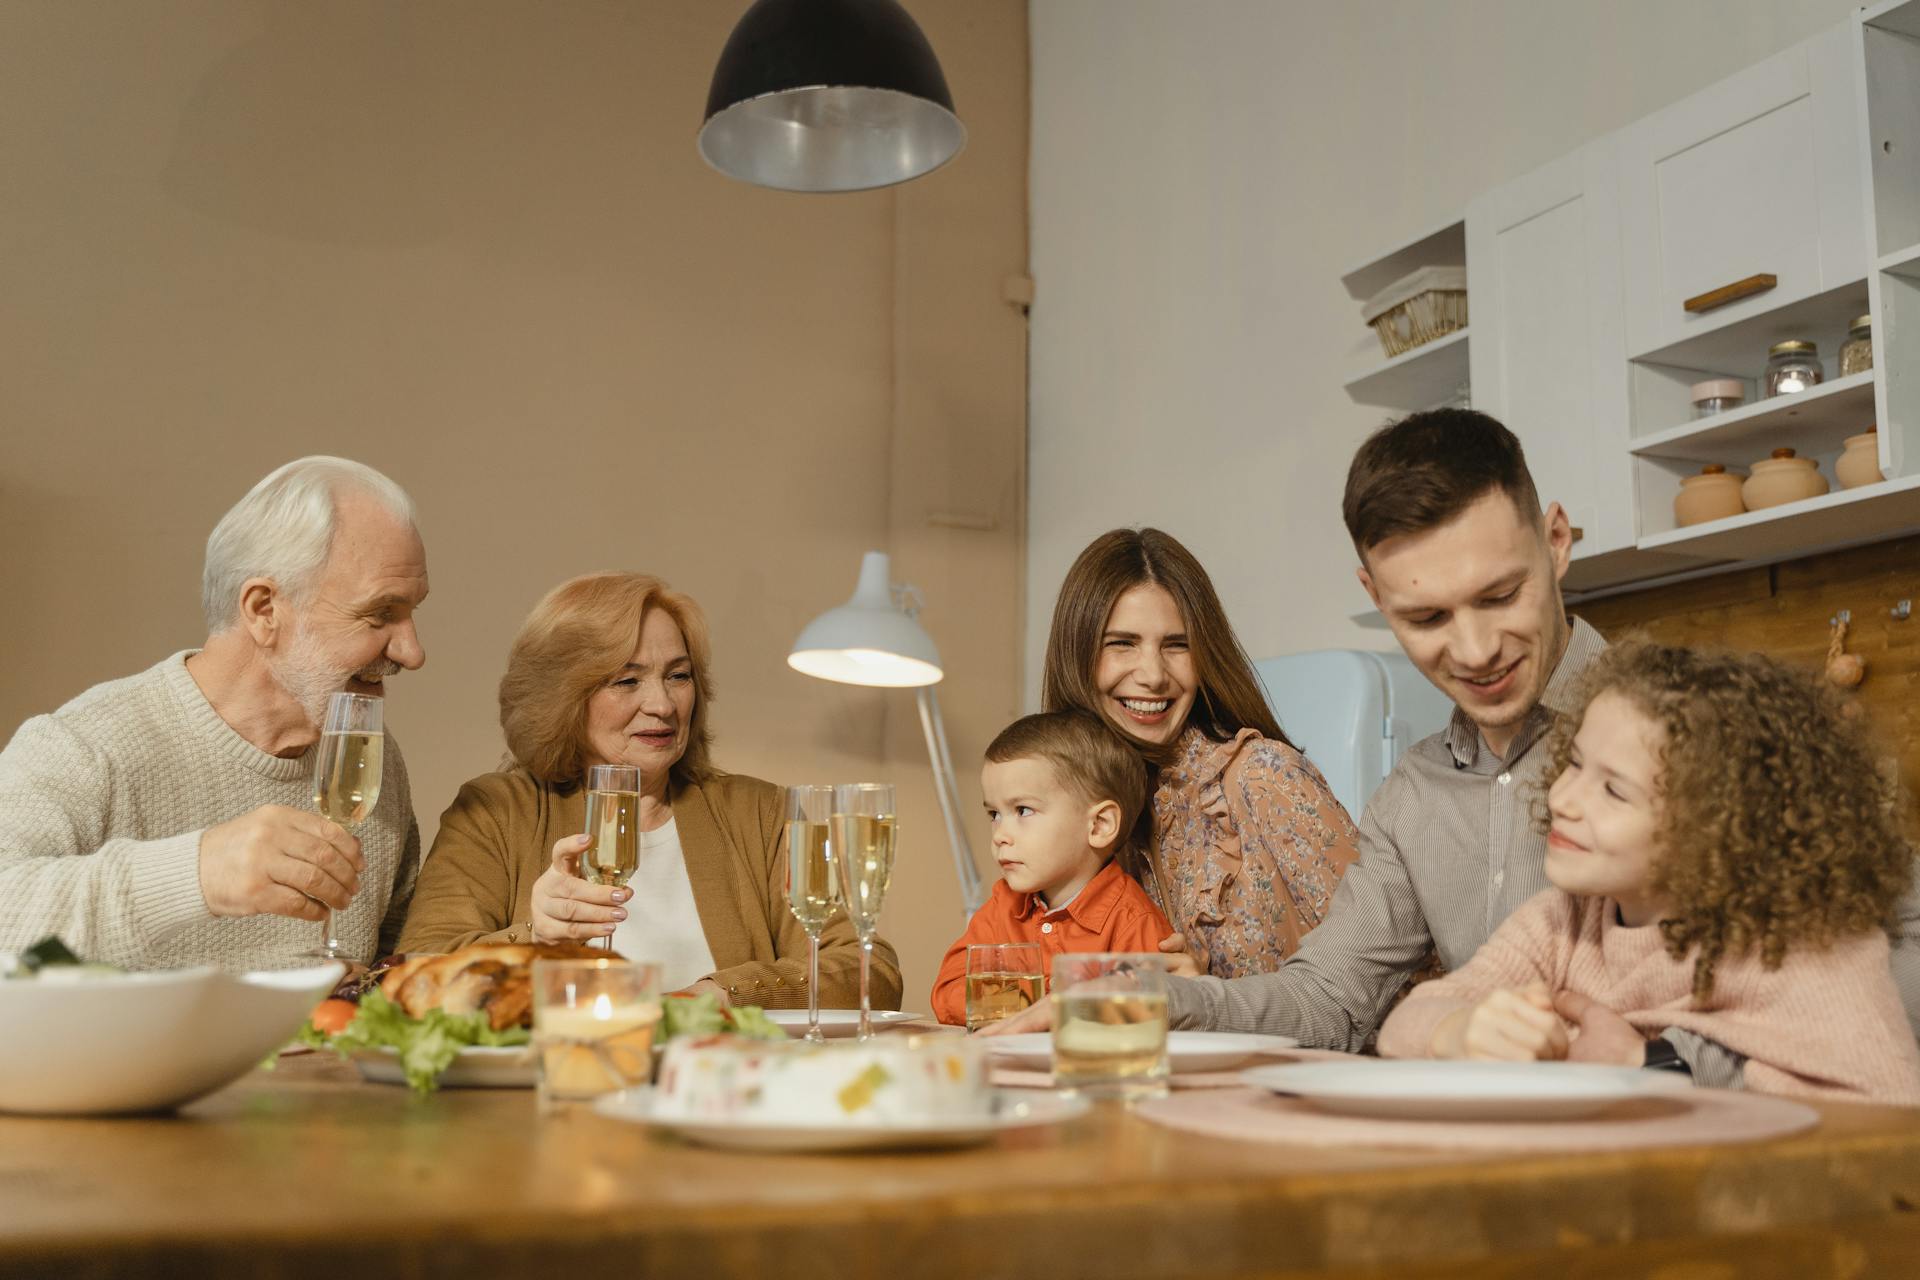 A family eating together | Source: Shutterstock